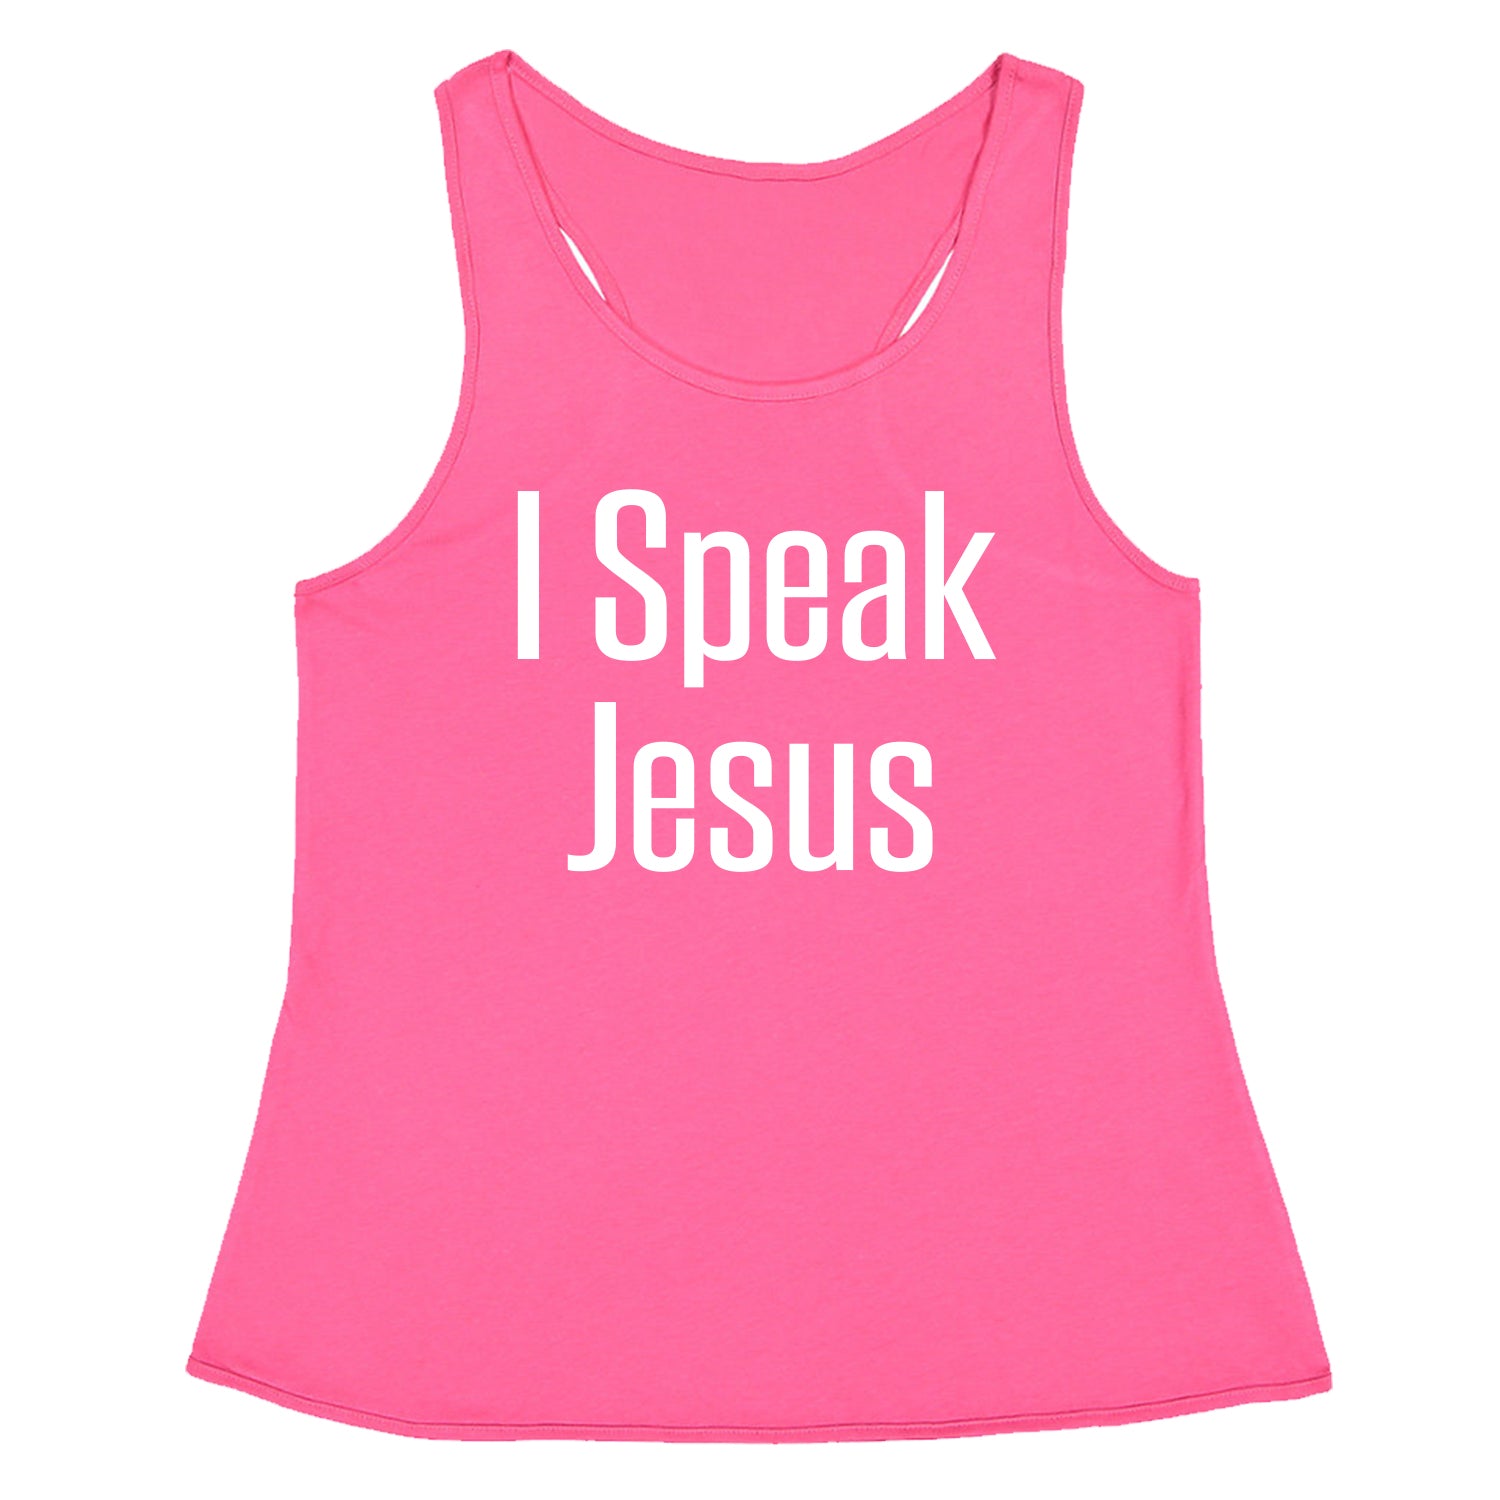 I Speak Jesus Racerback Tank Top for Women catholic, charity, christ, christian, christianity, city, concert, gayle, heaven, in, maverick, only, praise, scars, worship by Expression Tees